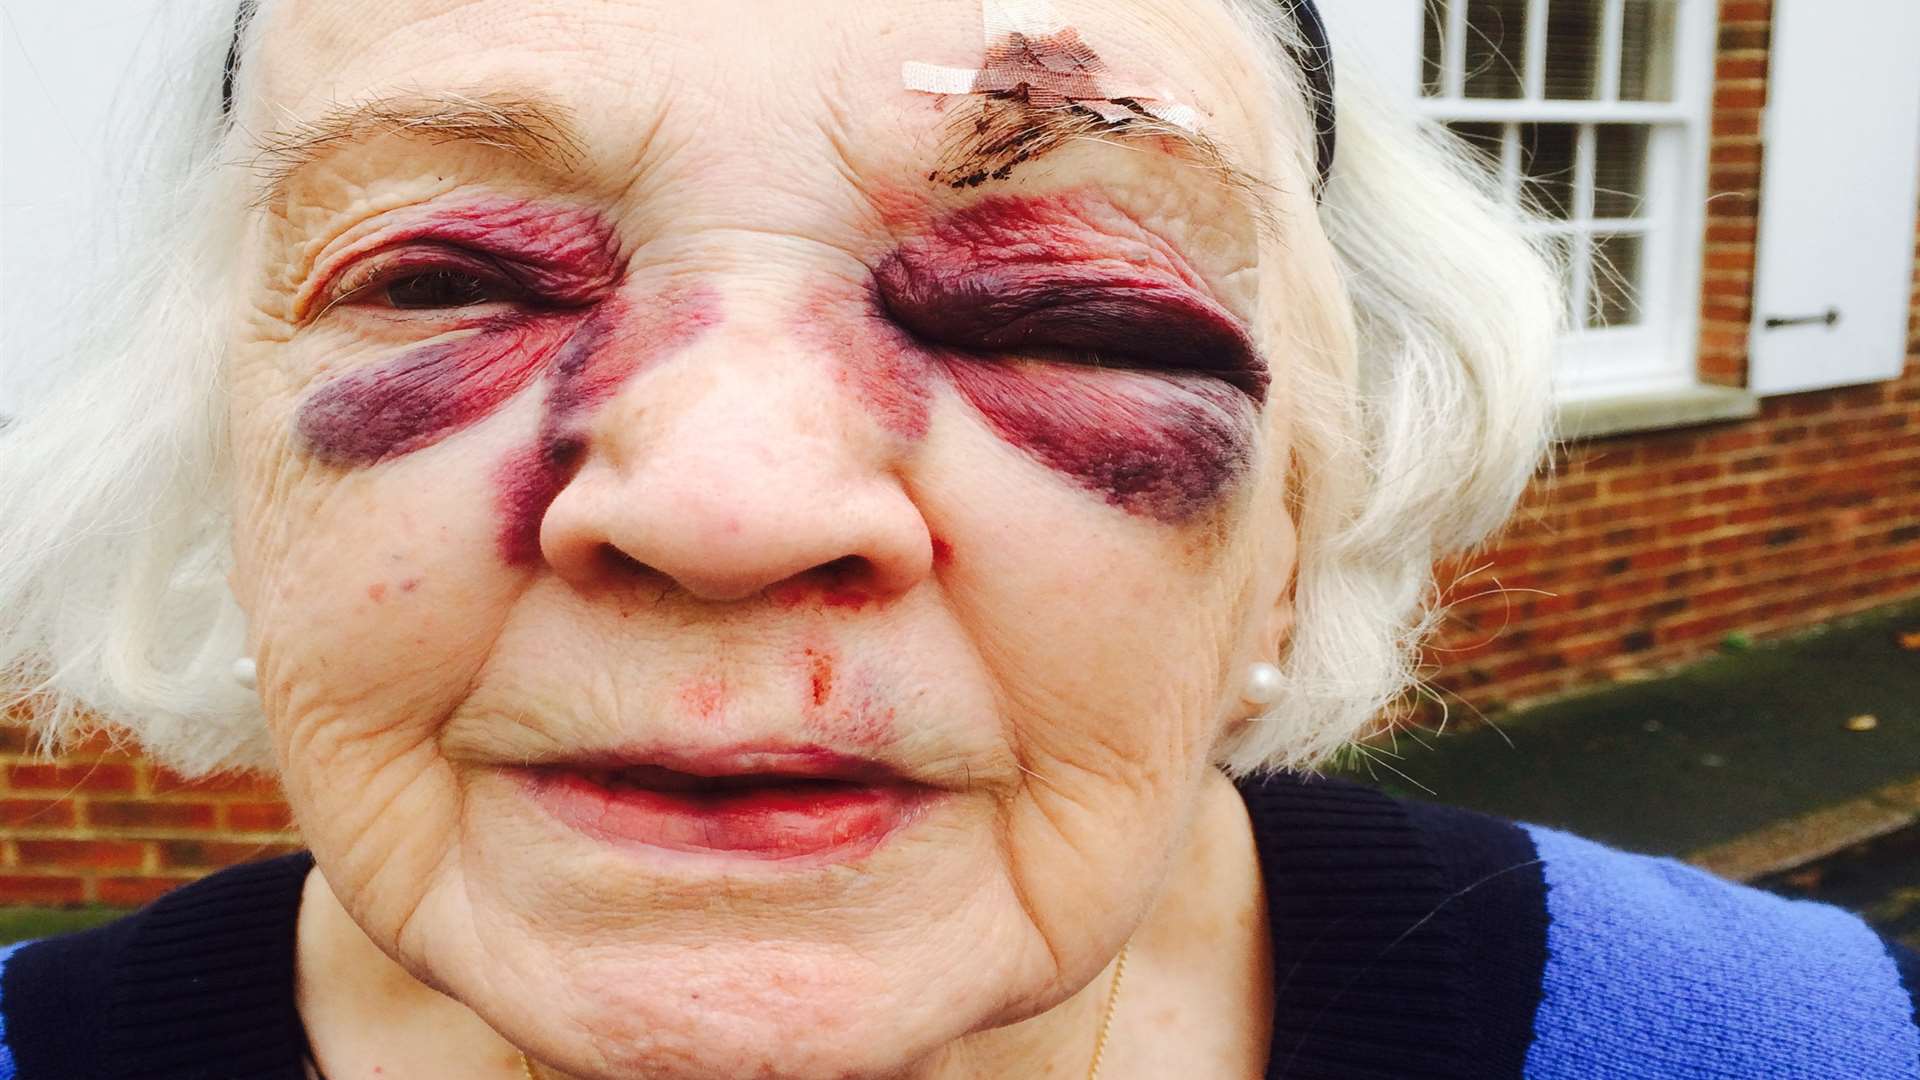 This elderly woman received stitches after a fall in Middle Street